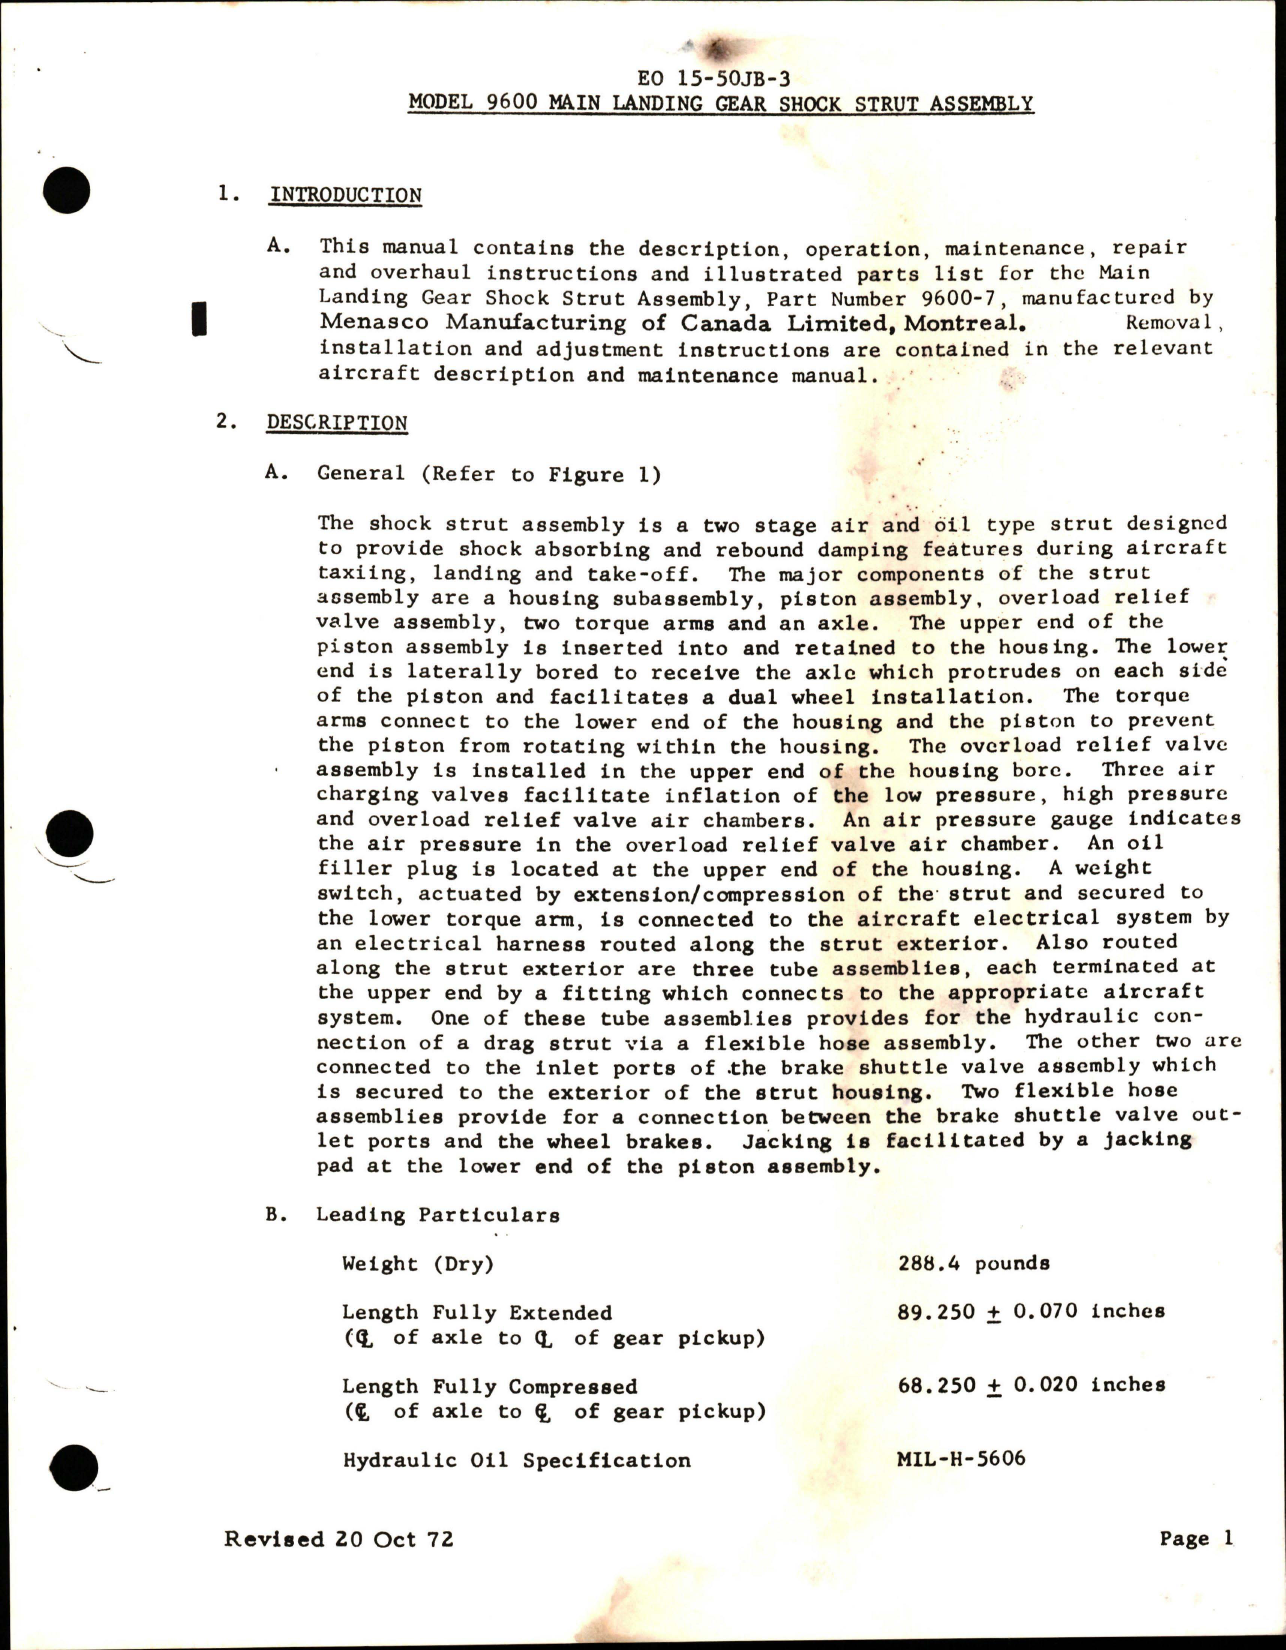 Sample page 5 from AirCorps Library document: Handbook w Part List for Main Landing Gear Shock Strut Assembly - Part 9600-7